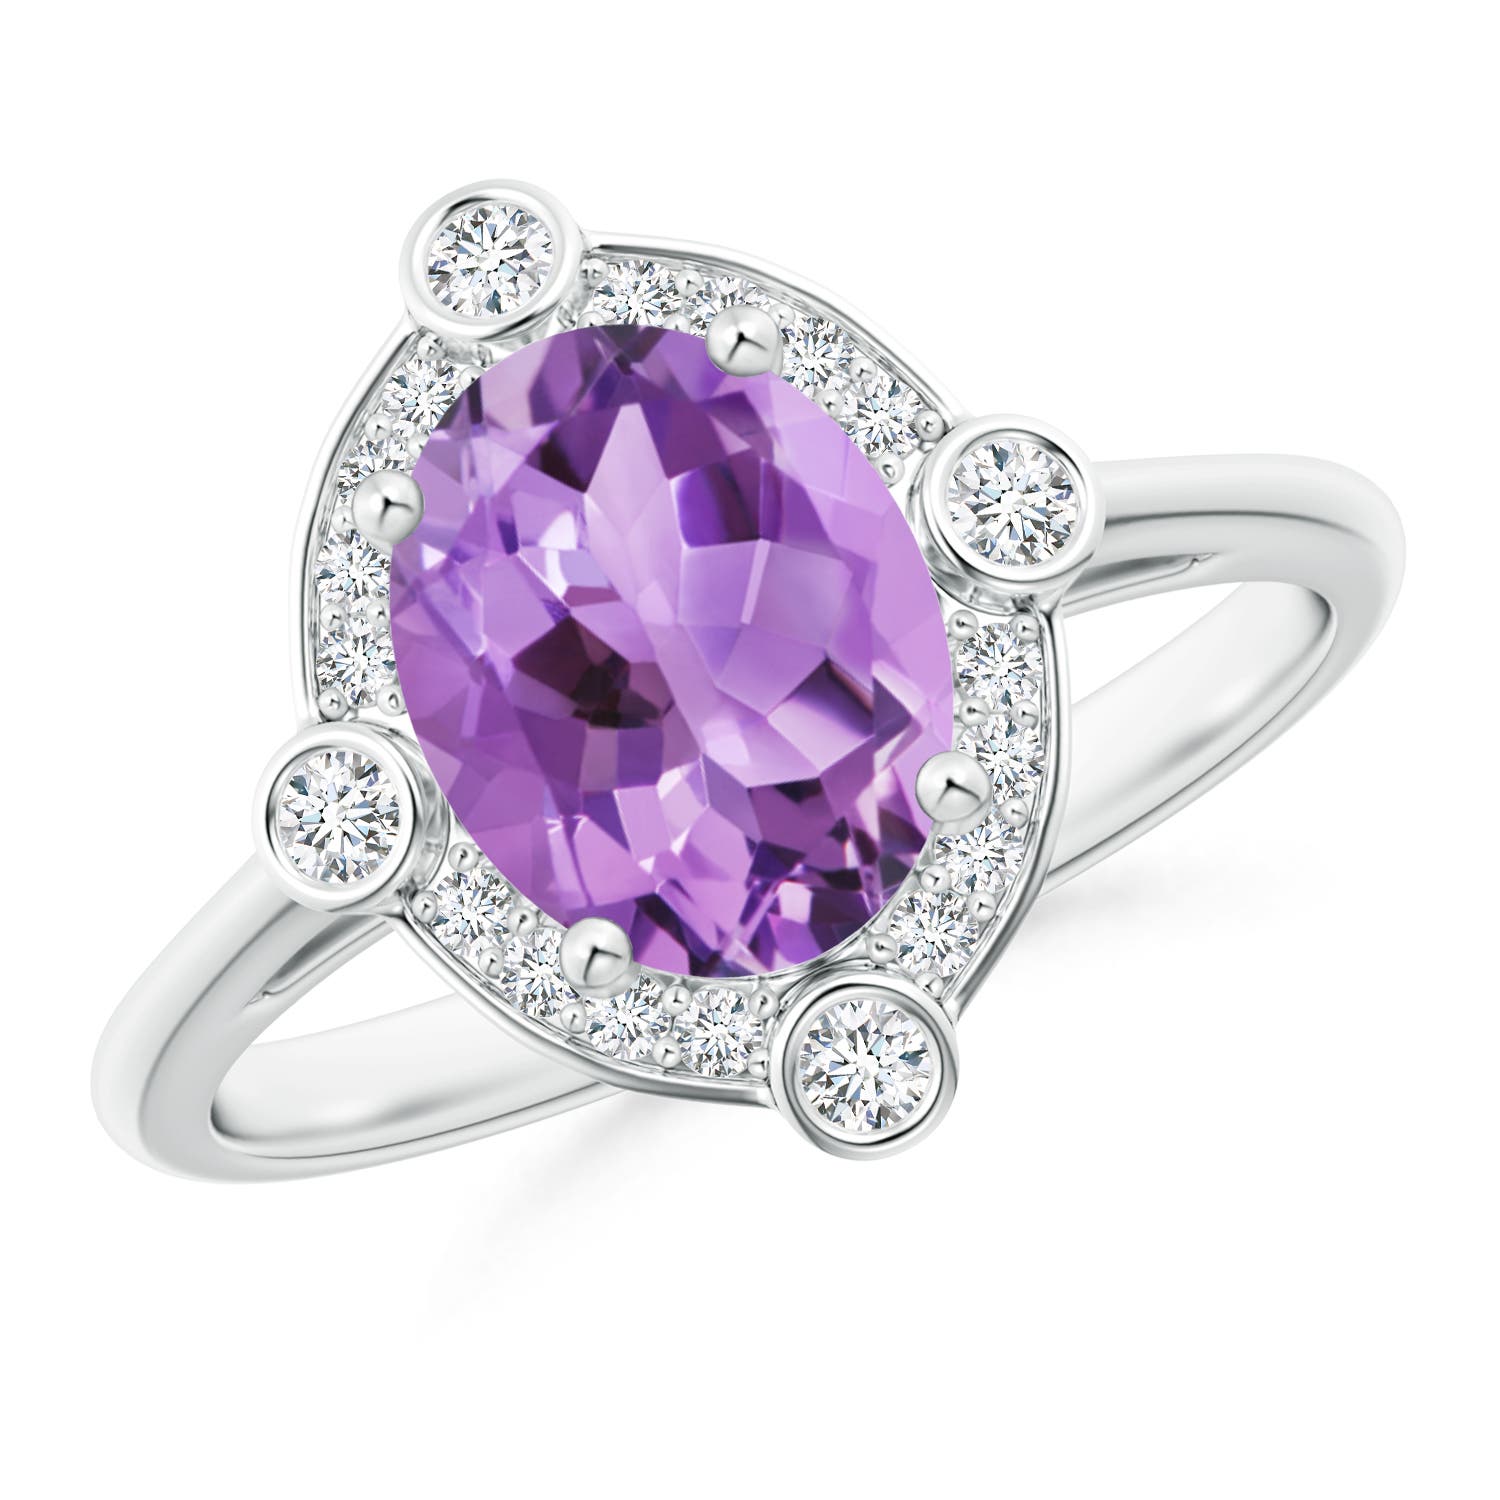 A - Amethyst / 1.74 CT / 14 KT White Gold